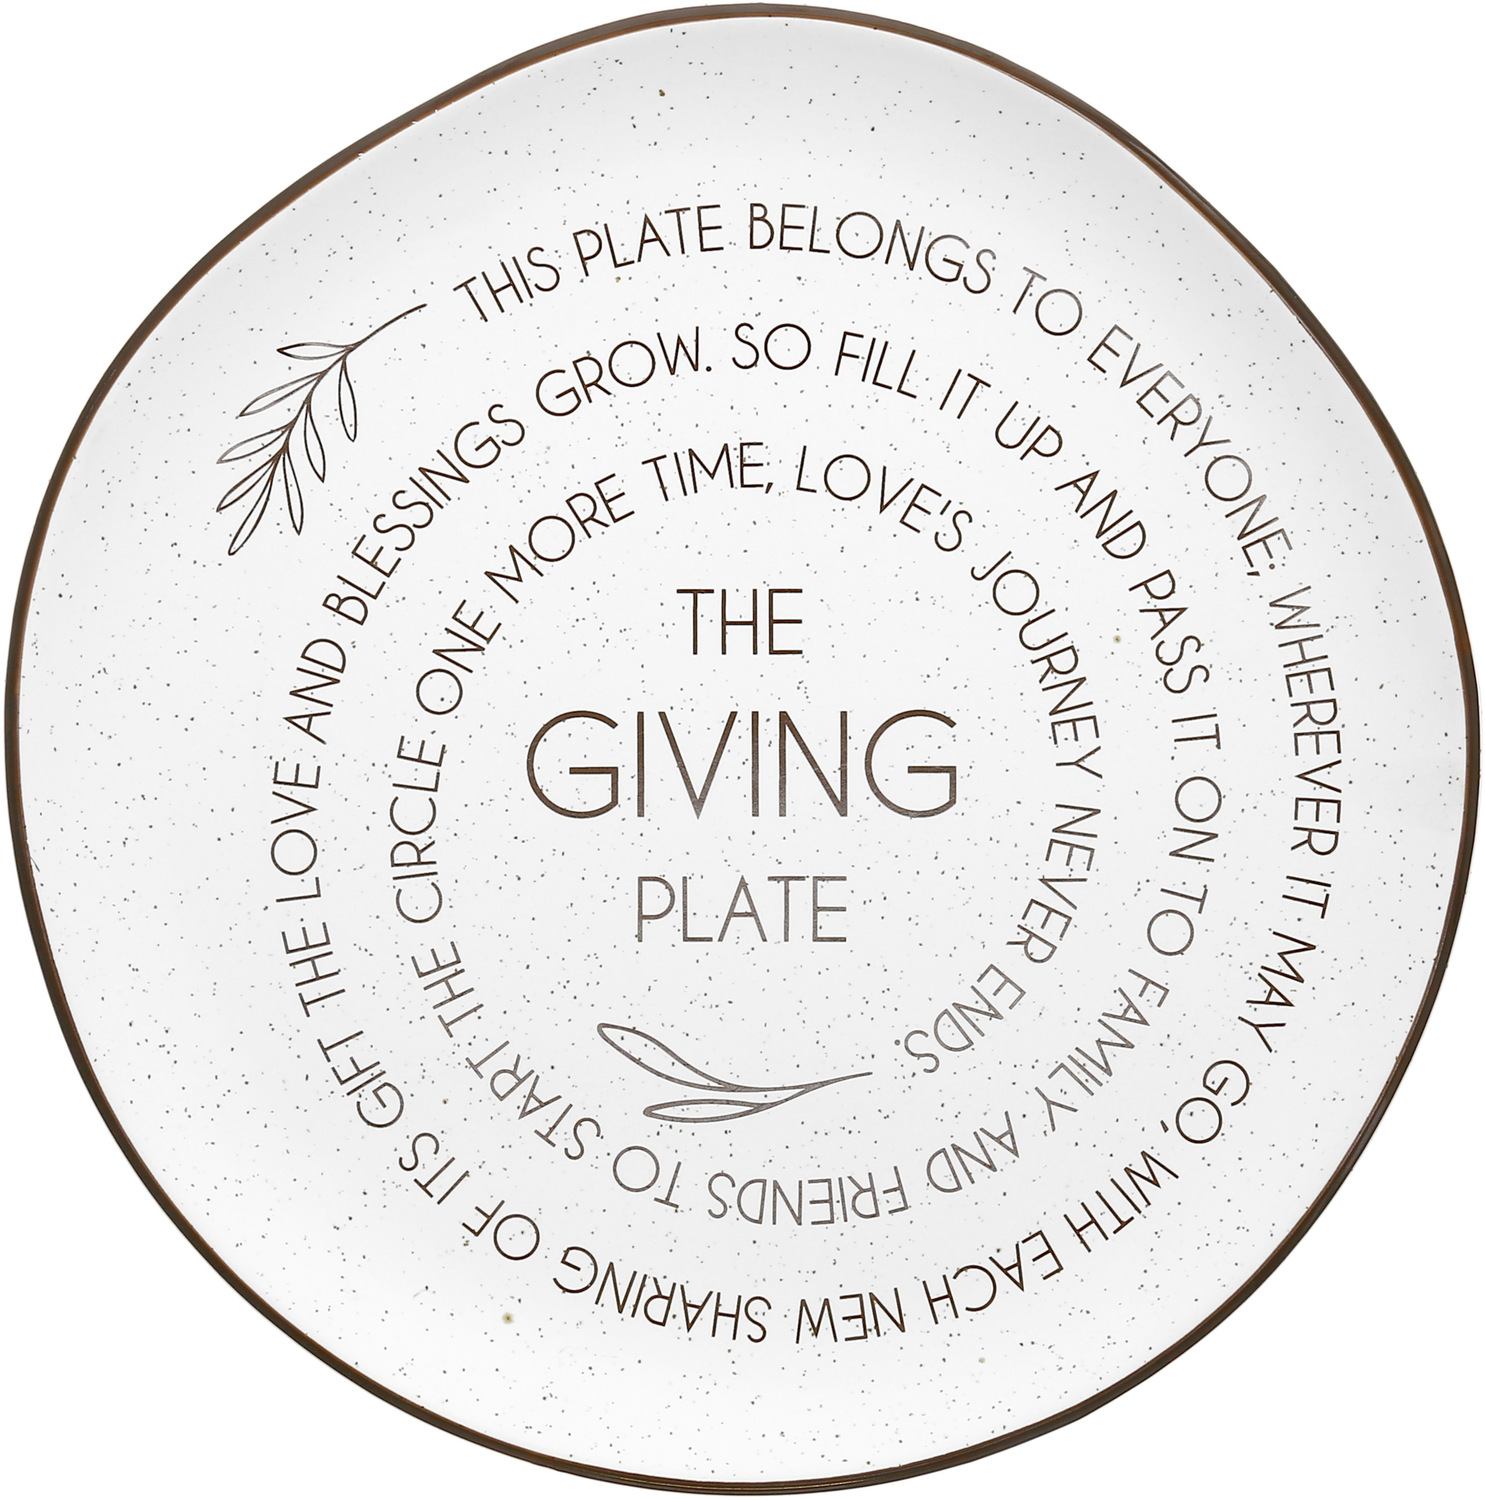 The Giving Plate by Hostess with the Mostess - The Giving Plate - 10.5" Ceramic Plate